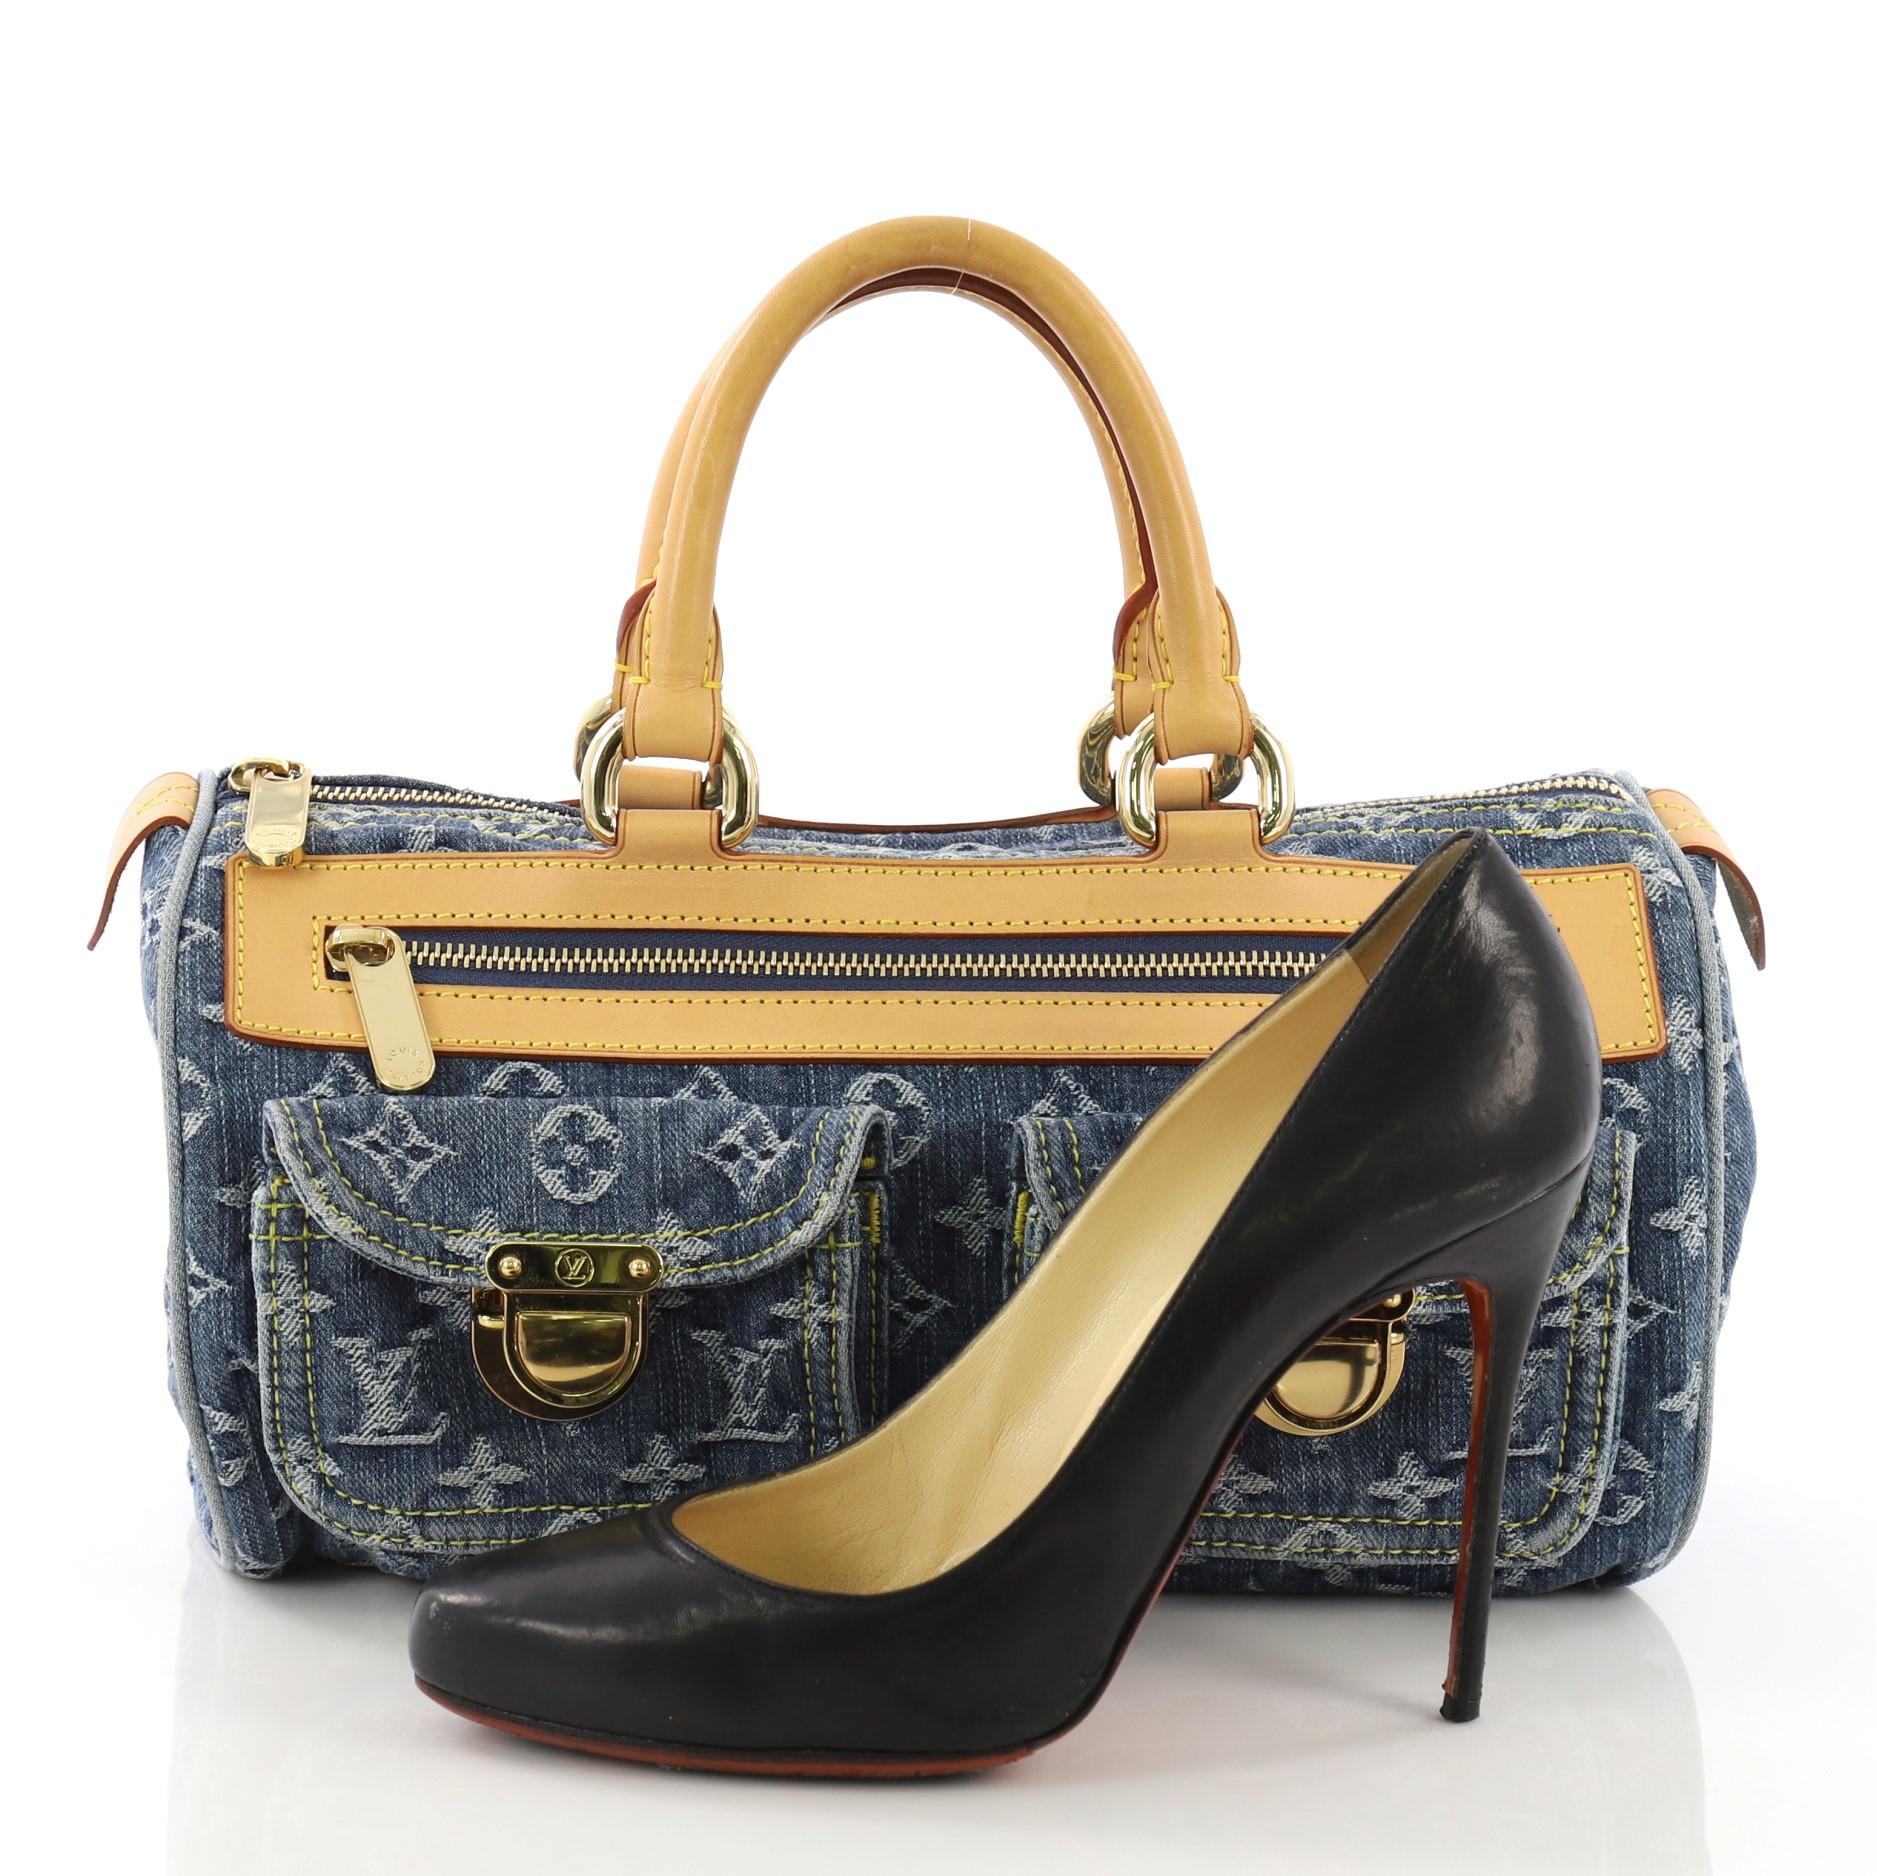 This Louis Vuitton Neo Speedy Bag Denim, crafted in blue denim, features dual rolled cowhide leather handles and trim, front zip compartment, two small front pockets with press lock closure, and gold-tone hardware. Its top zip closure opens to a